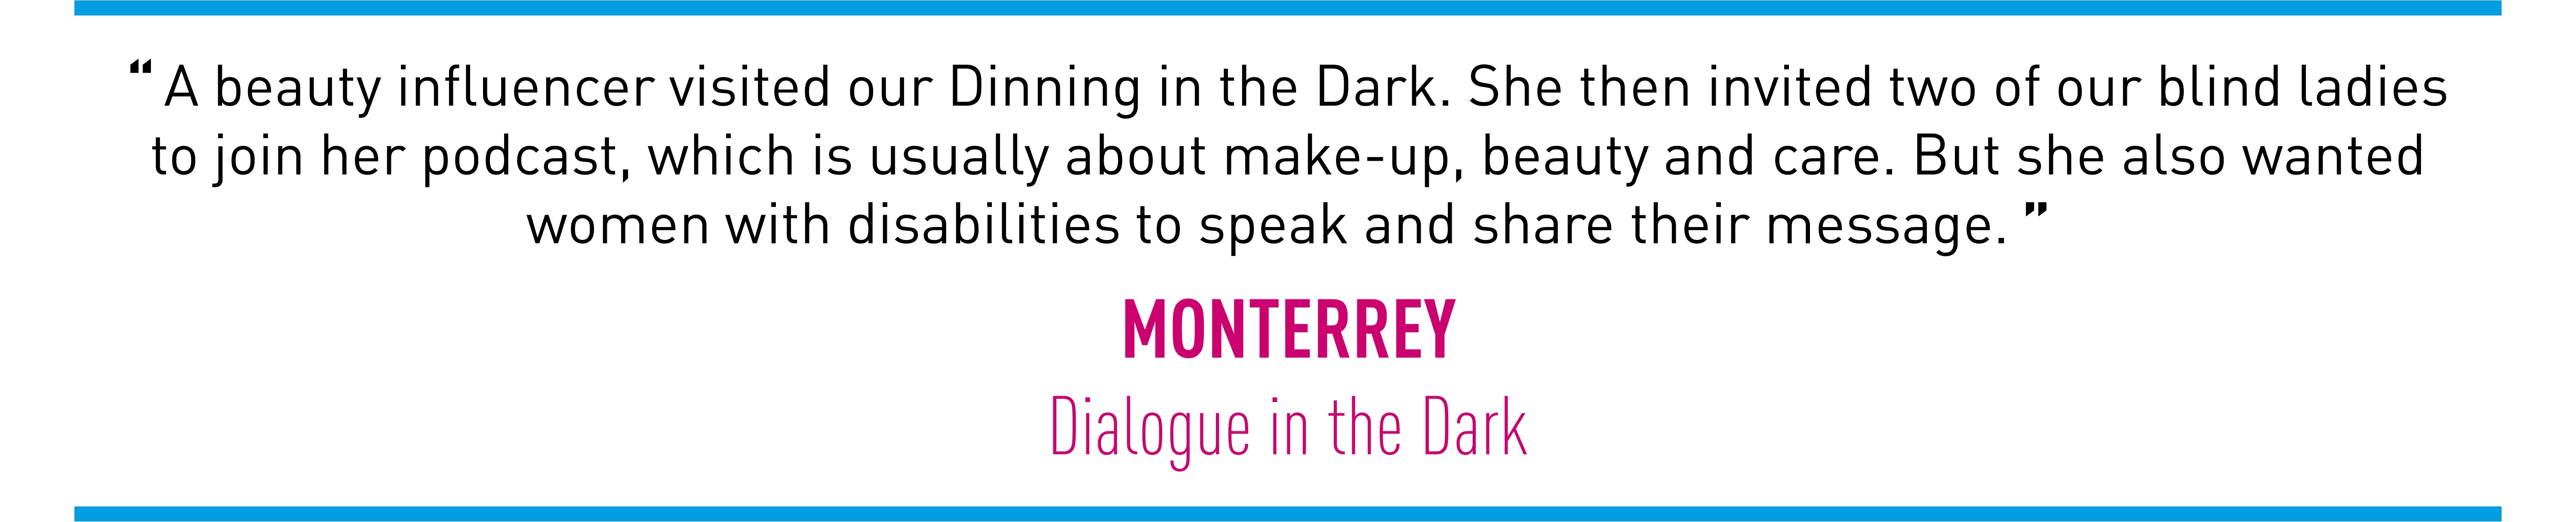 A beauty influencer visited our Dinning in the Dark. She then invited two of our blind ladies to join her podcast, which is usually about make-up, beauty and care. But she also wanted women with disabilities to speak and share their message. (MONTERREY Dialogue in the Dark)